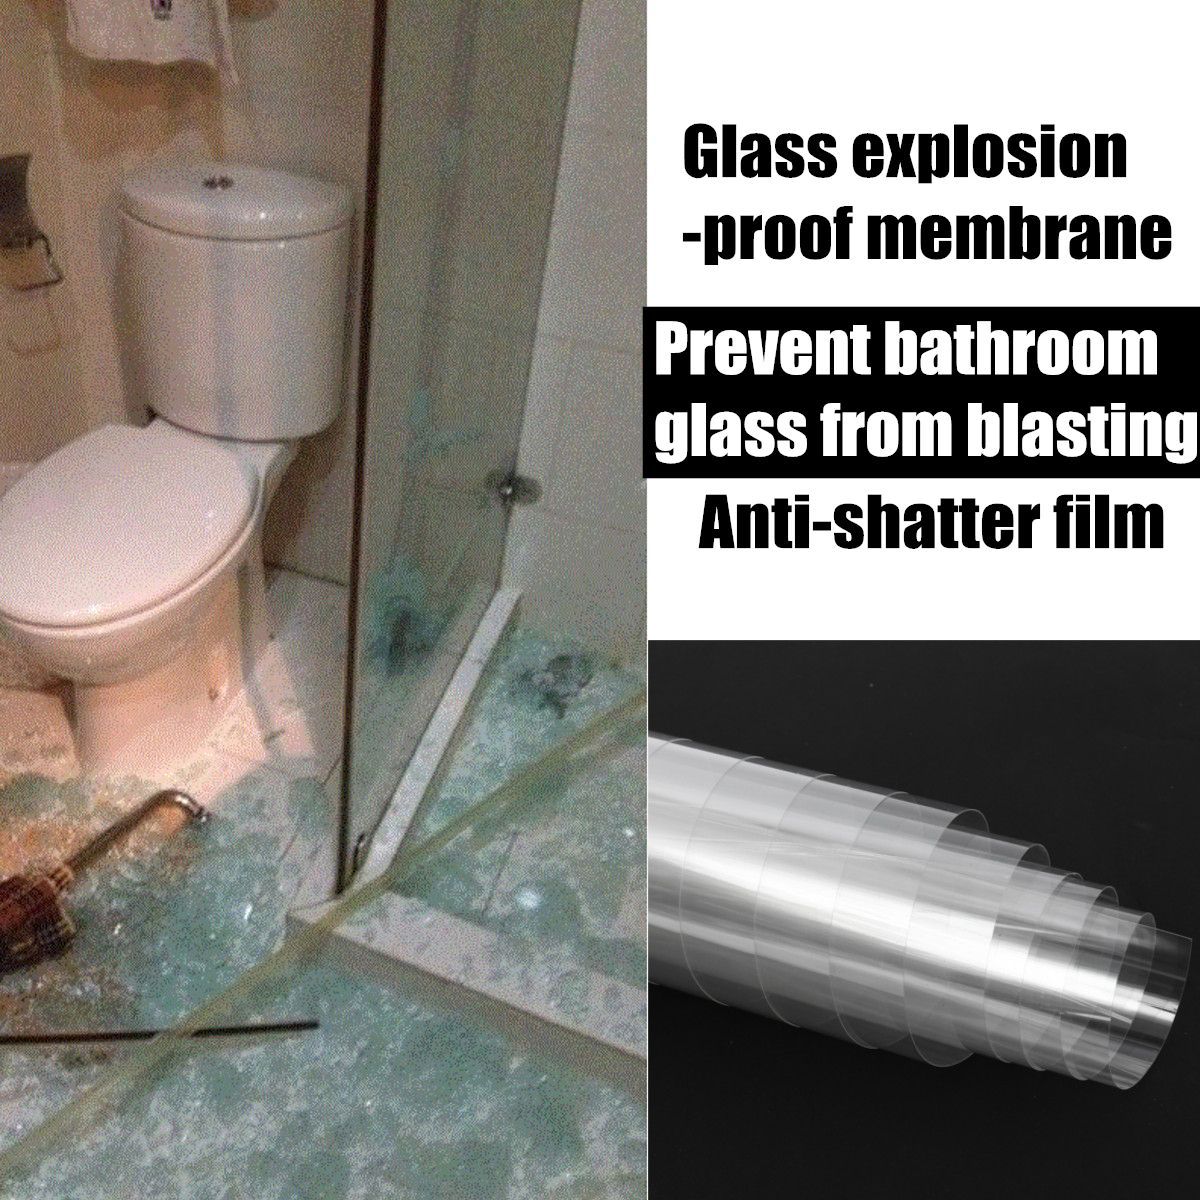 2M-4Mil-Safety-Anti-Shatter-Clear-Window-Blind-Film-Glass-Protector-Home-Safety-1588169